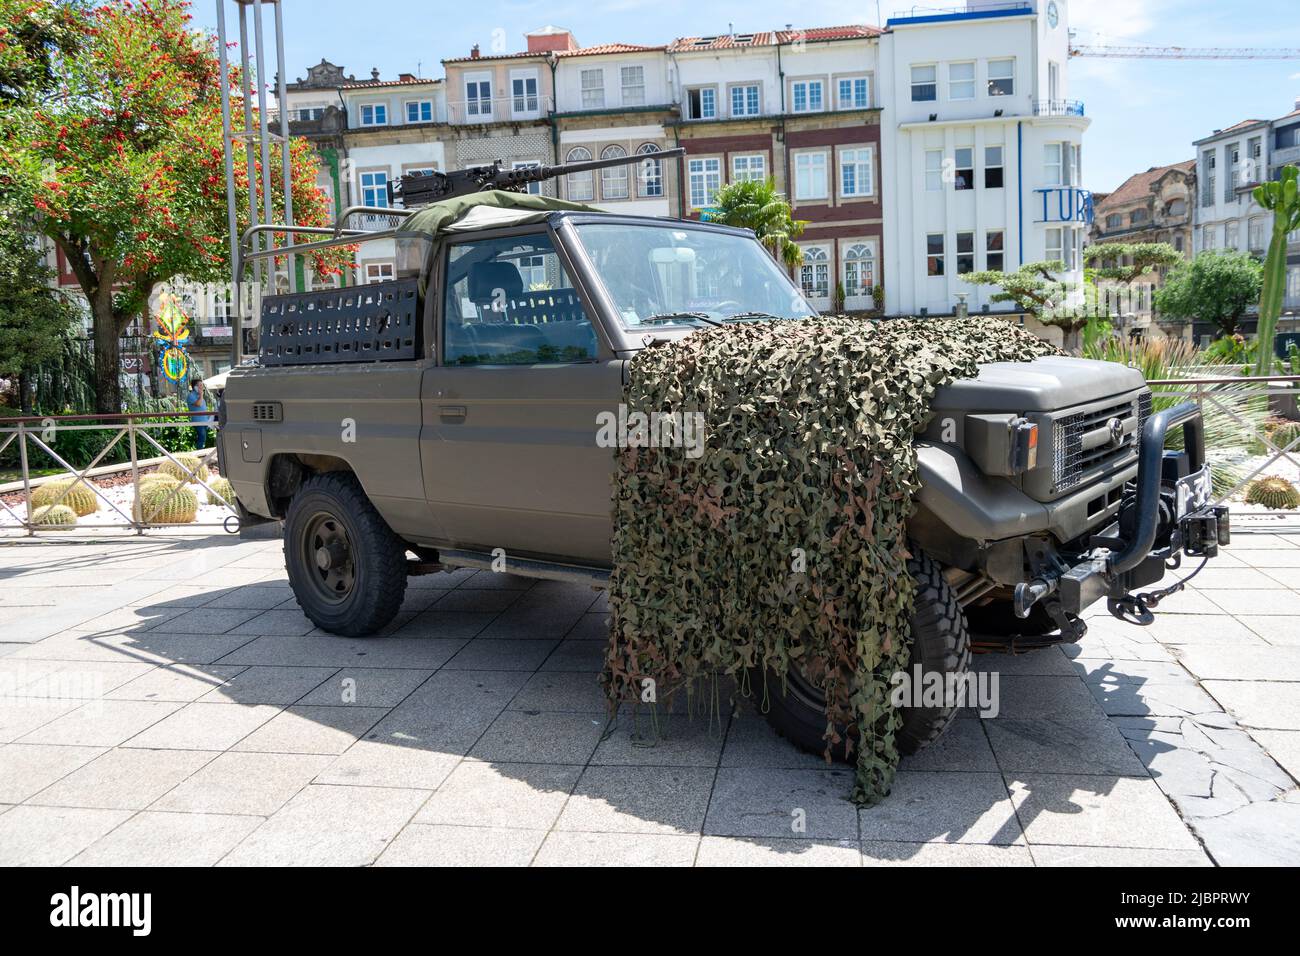 Armed military vehicles with camouflage on urban áreas heavy crowded with civilians. Portugal 10 June commemorations in the city of Braga. Stock Photo